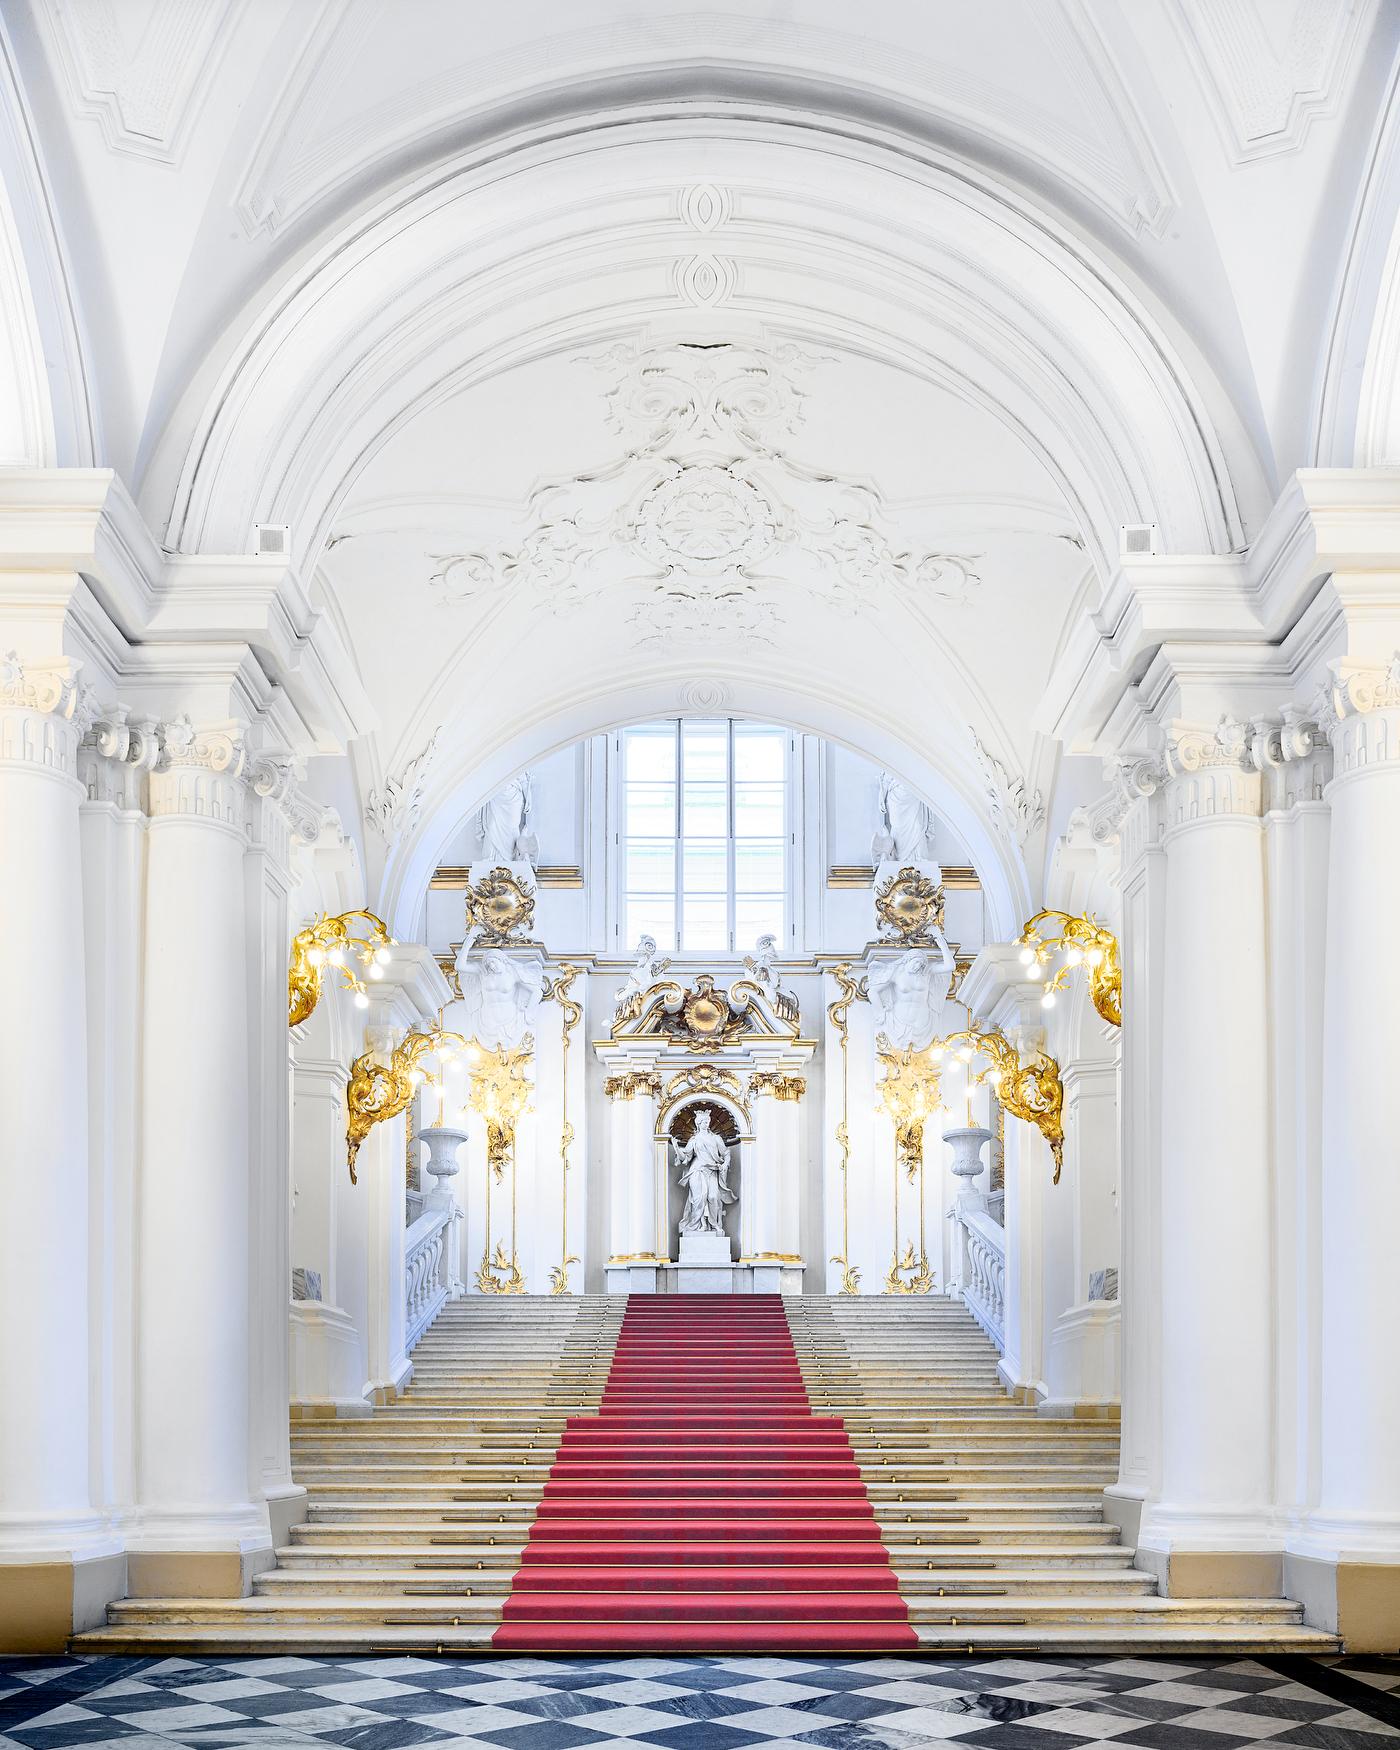 Title: Jordan Stairs II, State Hermitage, St Petersburg, Russia

All available sizes & editions for each size of this photograph:
21” x 26" Edition of 7
32” x 40" Edition of 7
44” x 55” Edition of 10
59” x 73.5” Edition of 5

Burdeny’s Russia